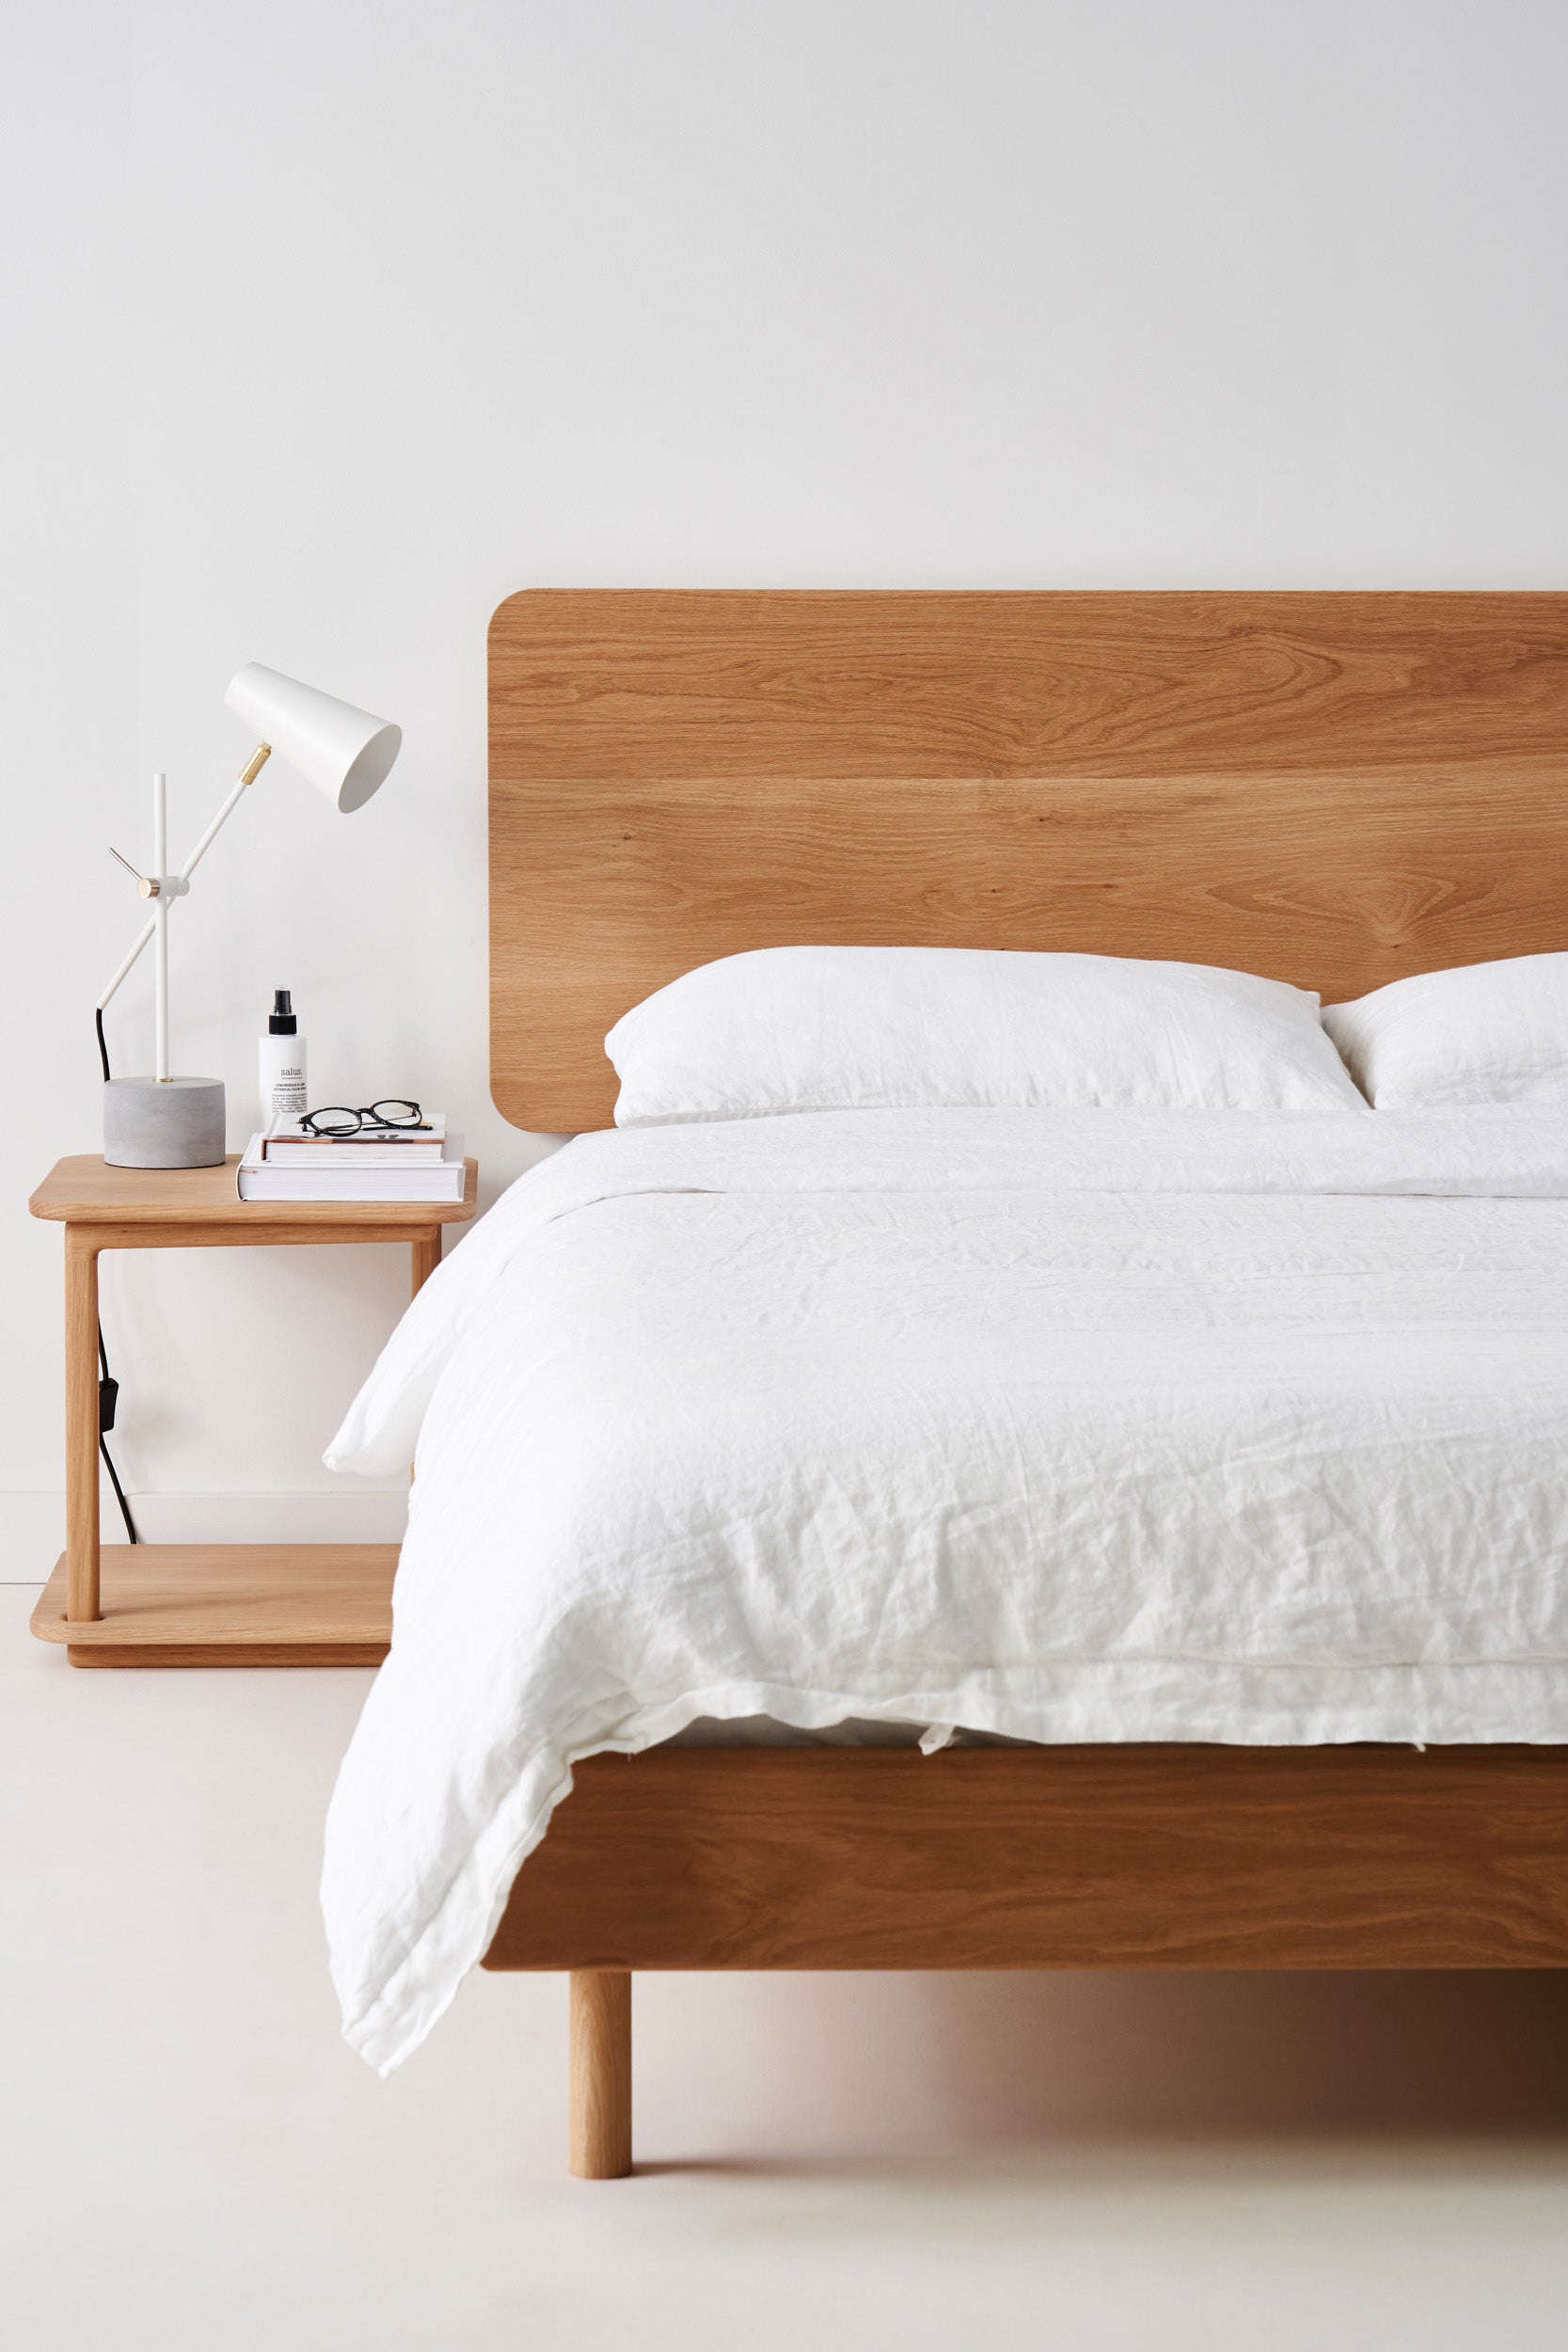 Timber Bed Frames in Minimalist Bedrooms